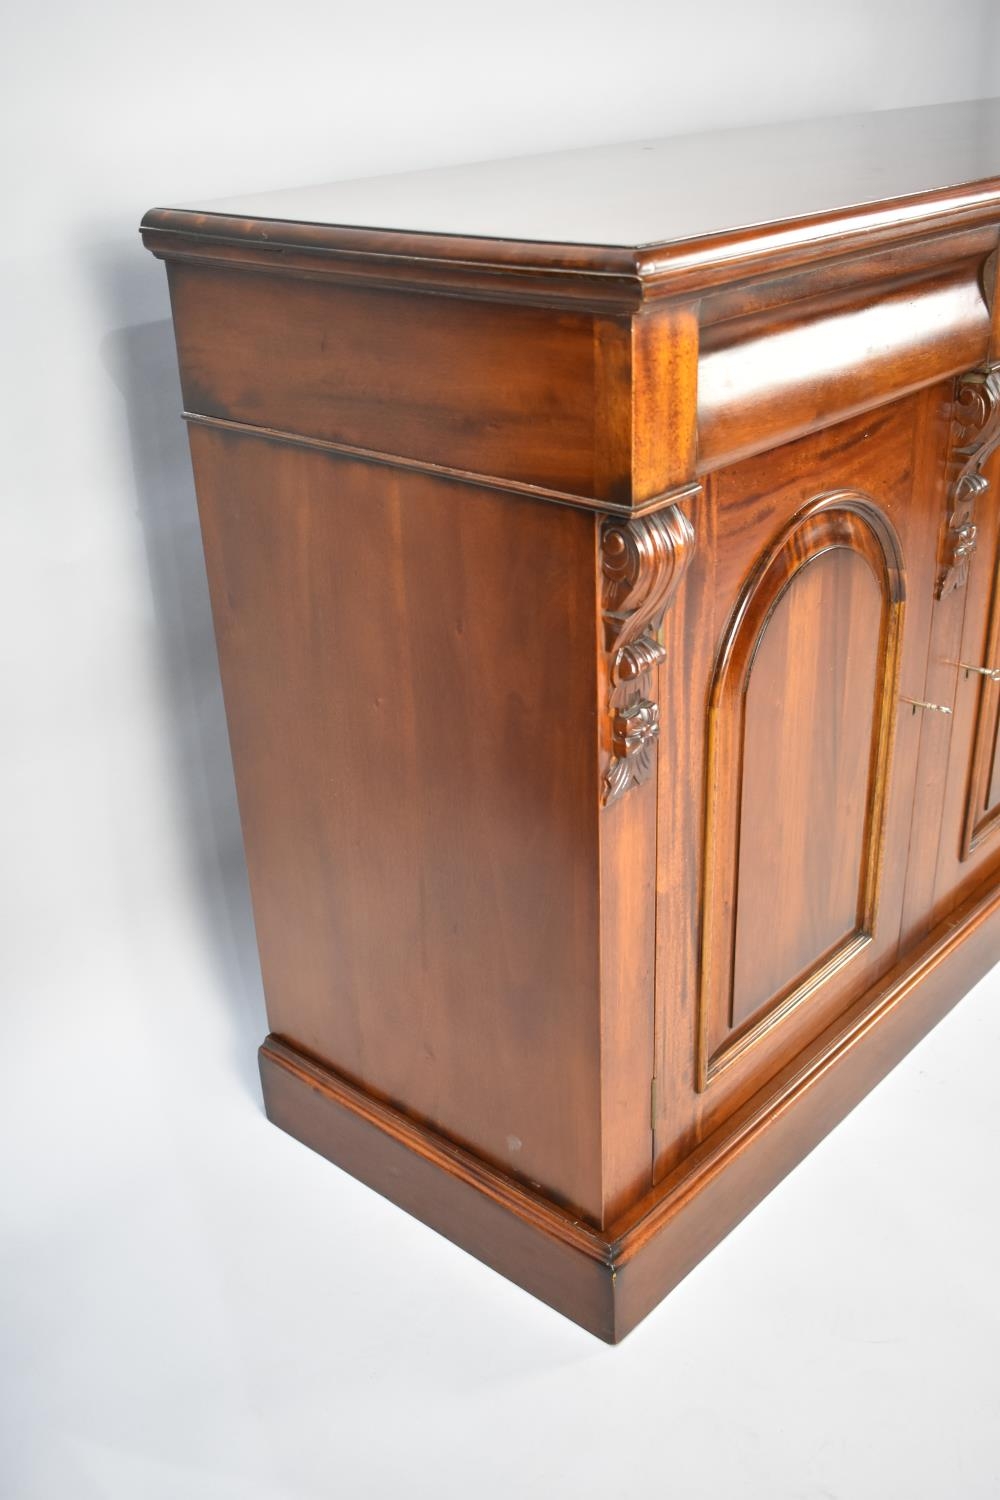 A Victorian Style Mahogany Three Drawer Sideboard by Connoisseur of Shrewsbury, with Three Keys - Image 3 of 5